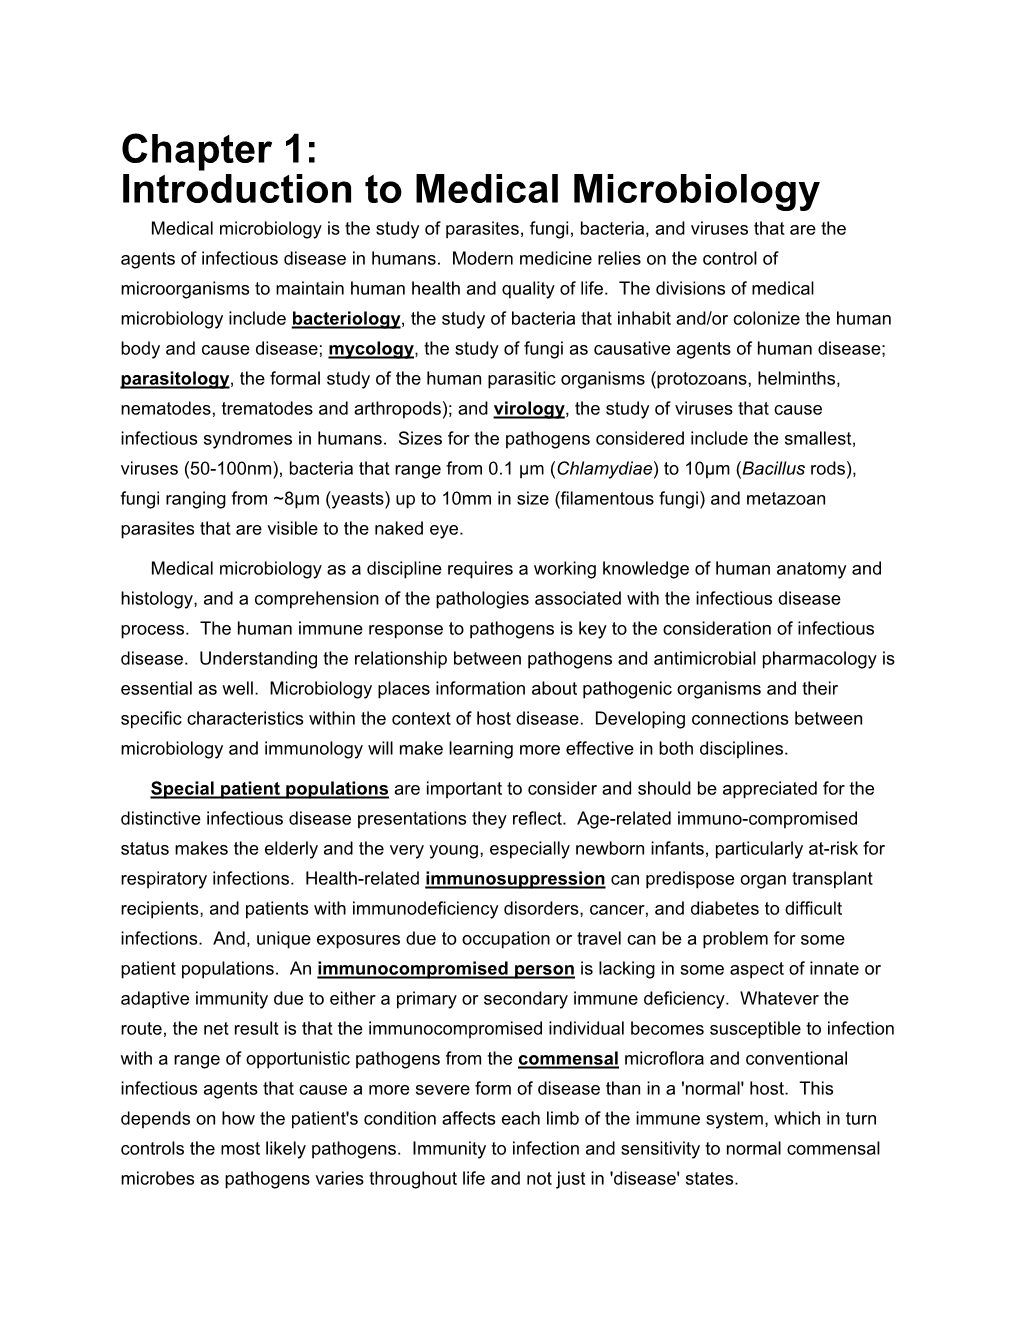 Chapter 1: Introduction to Medical Microbiology